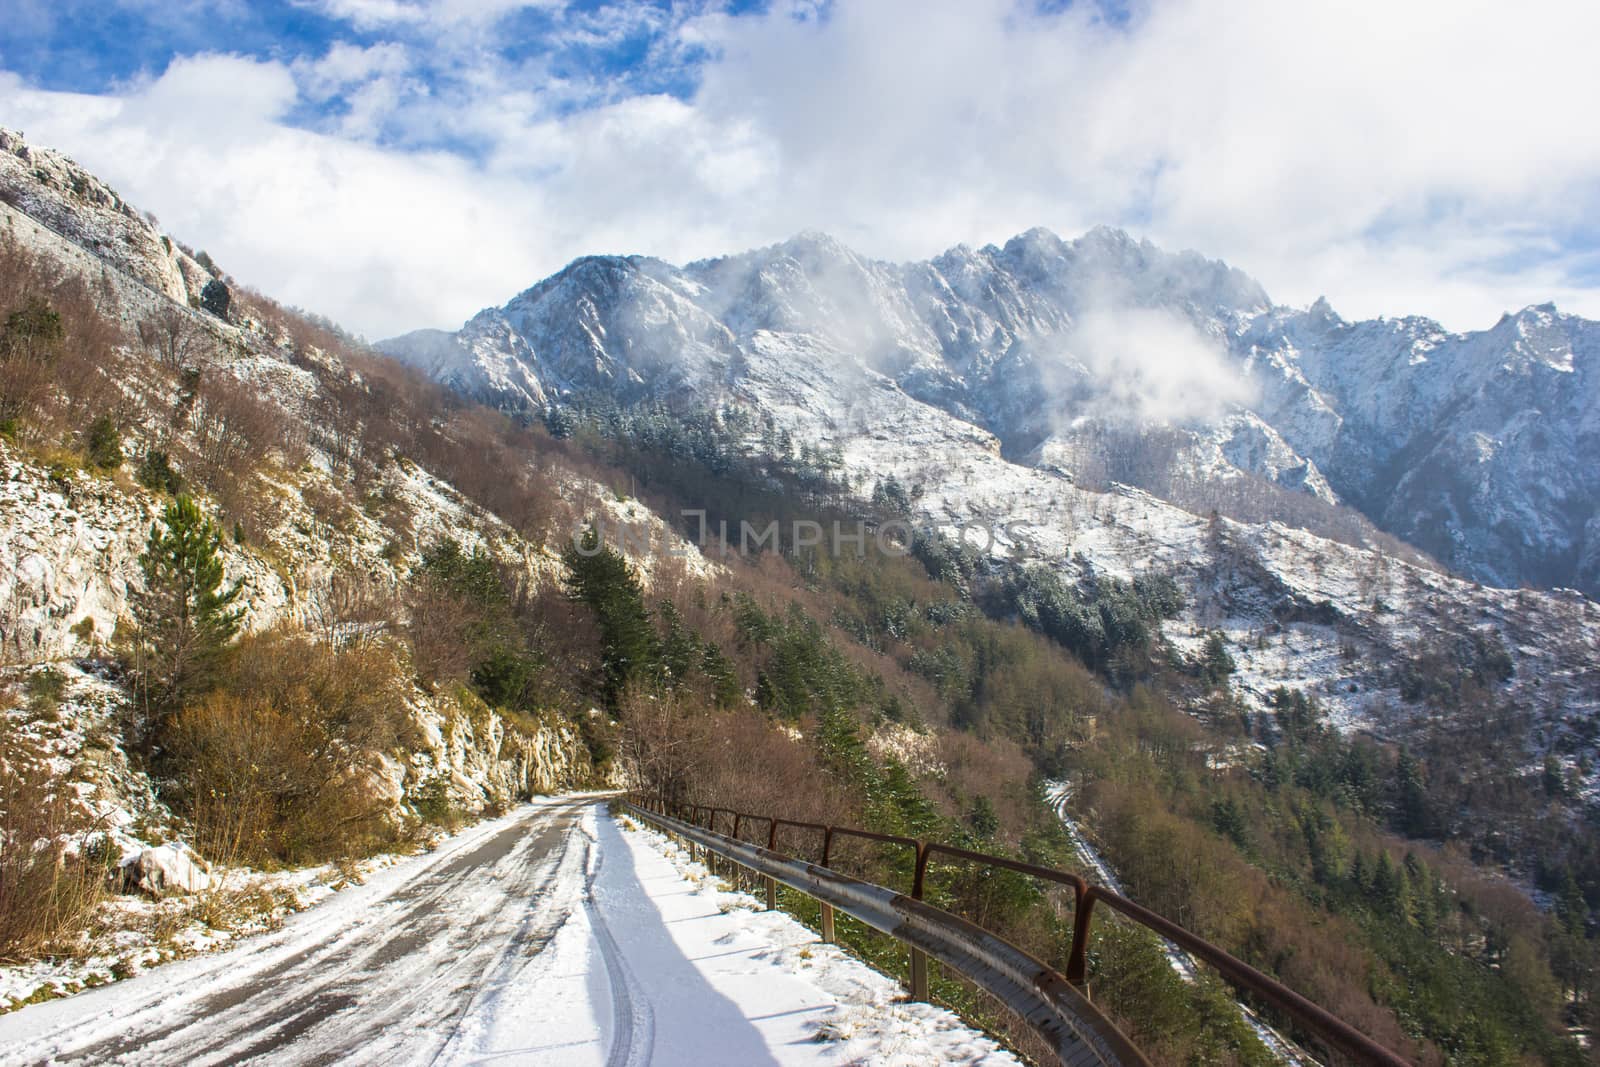 The first snow of the Apuan Alps whitening white marble quarries